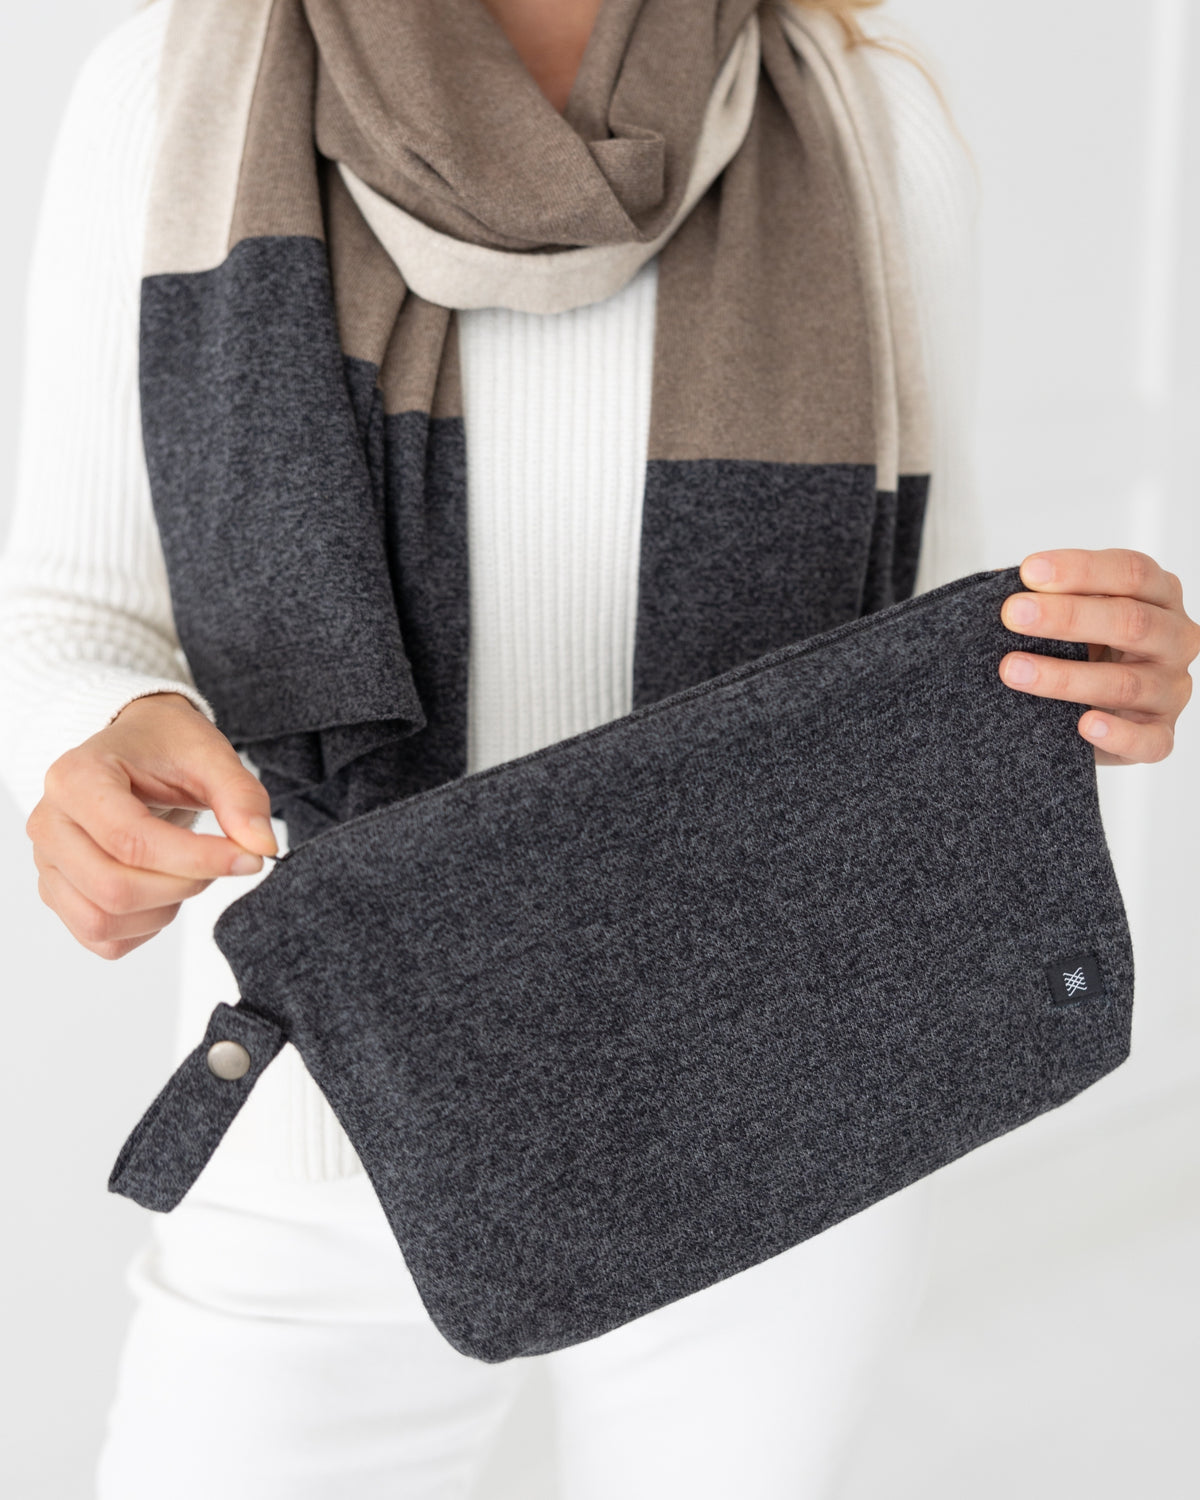 The Dreamsoft Travel Scarf Carry Pouch - Graphite